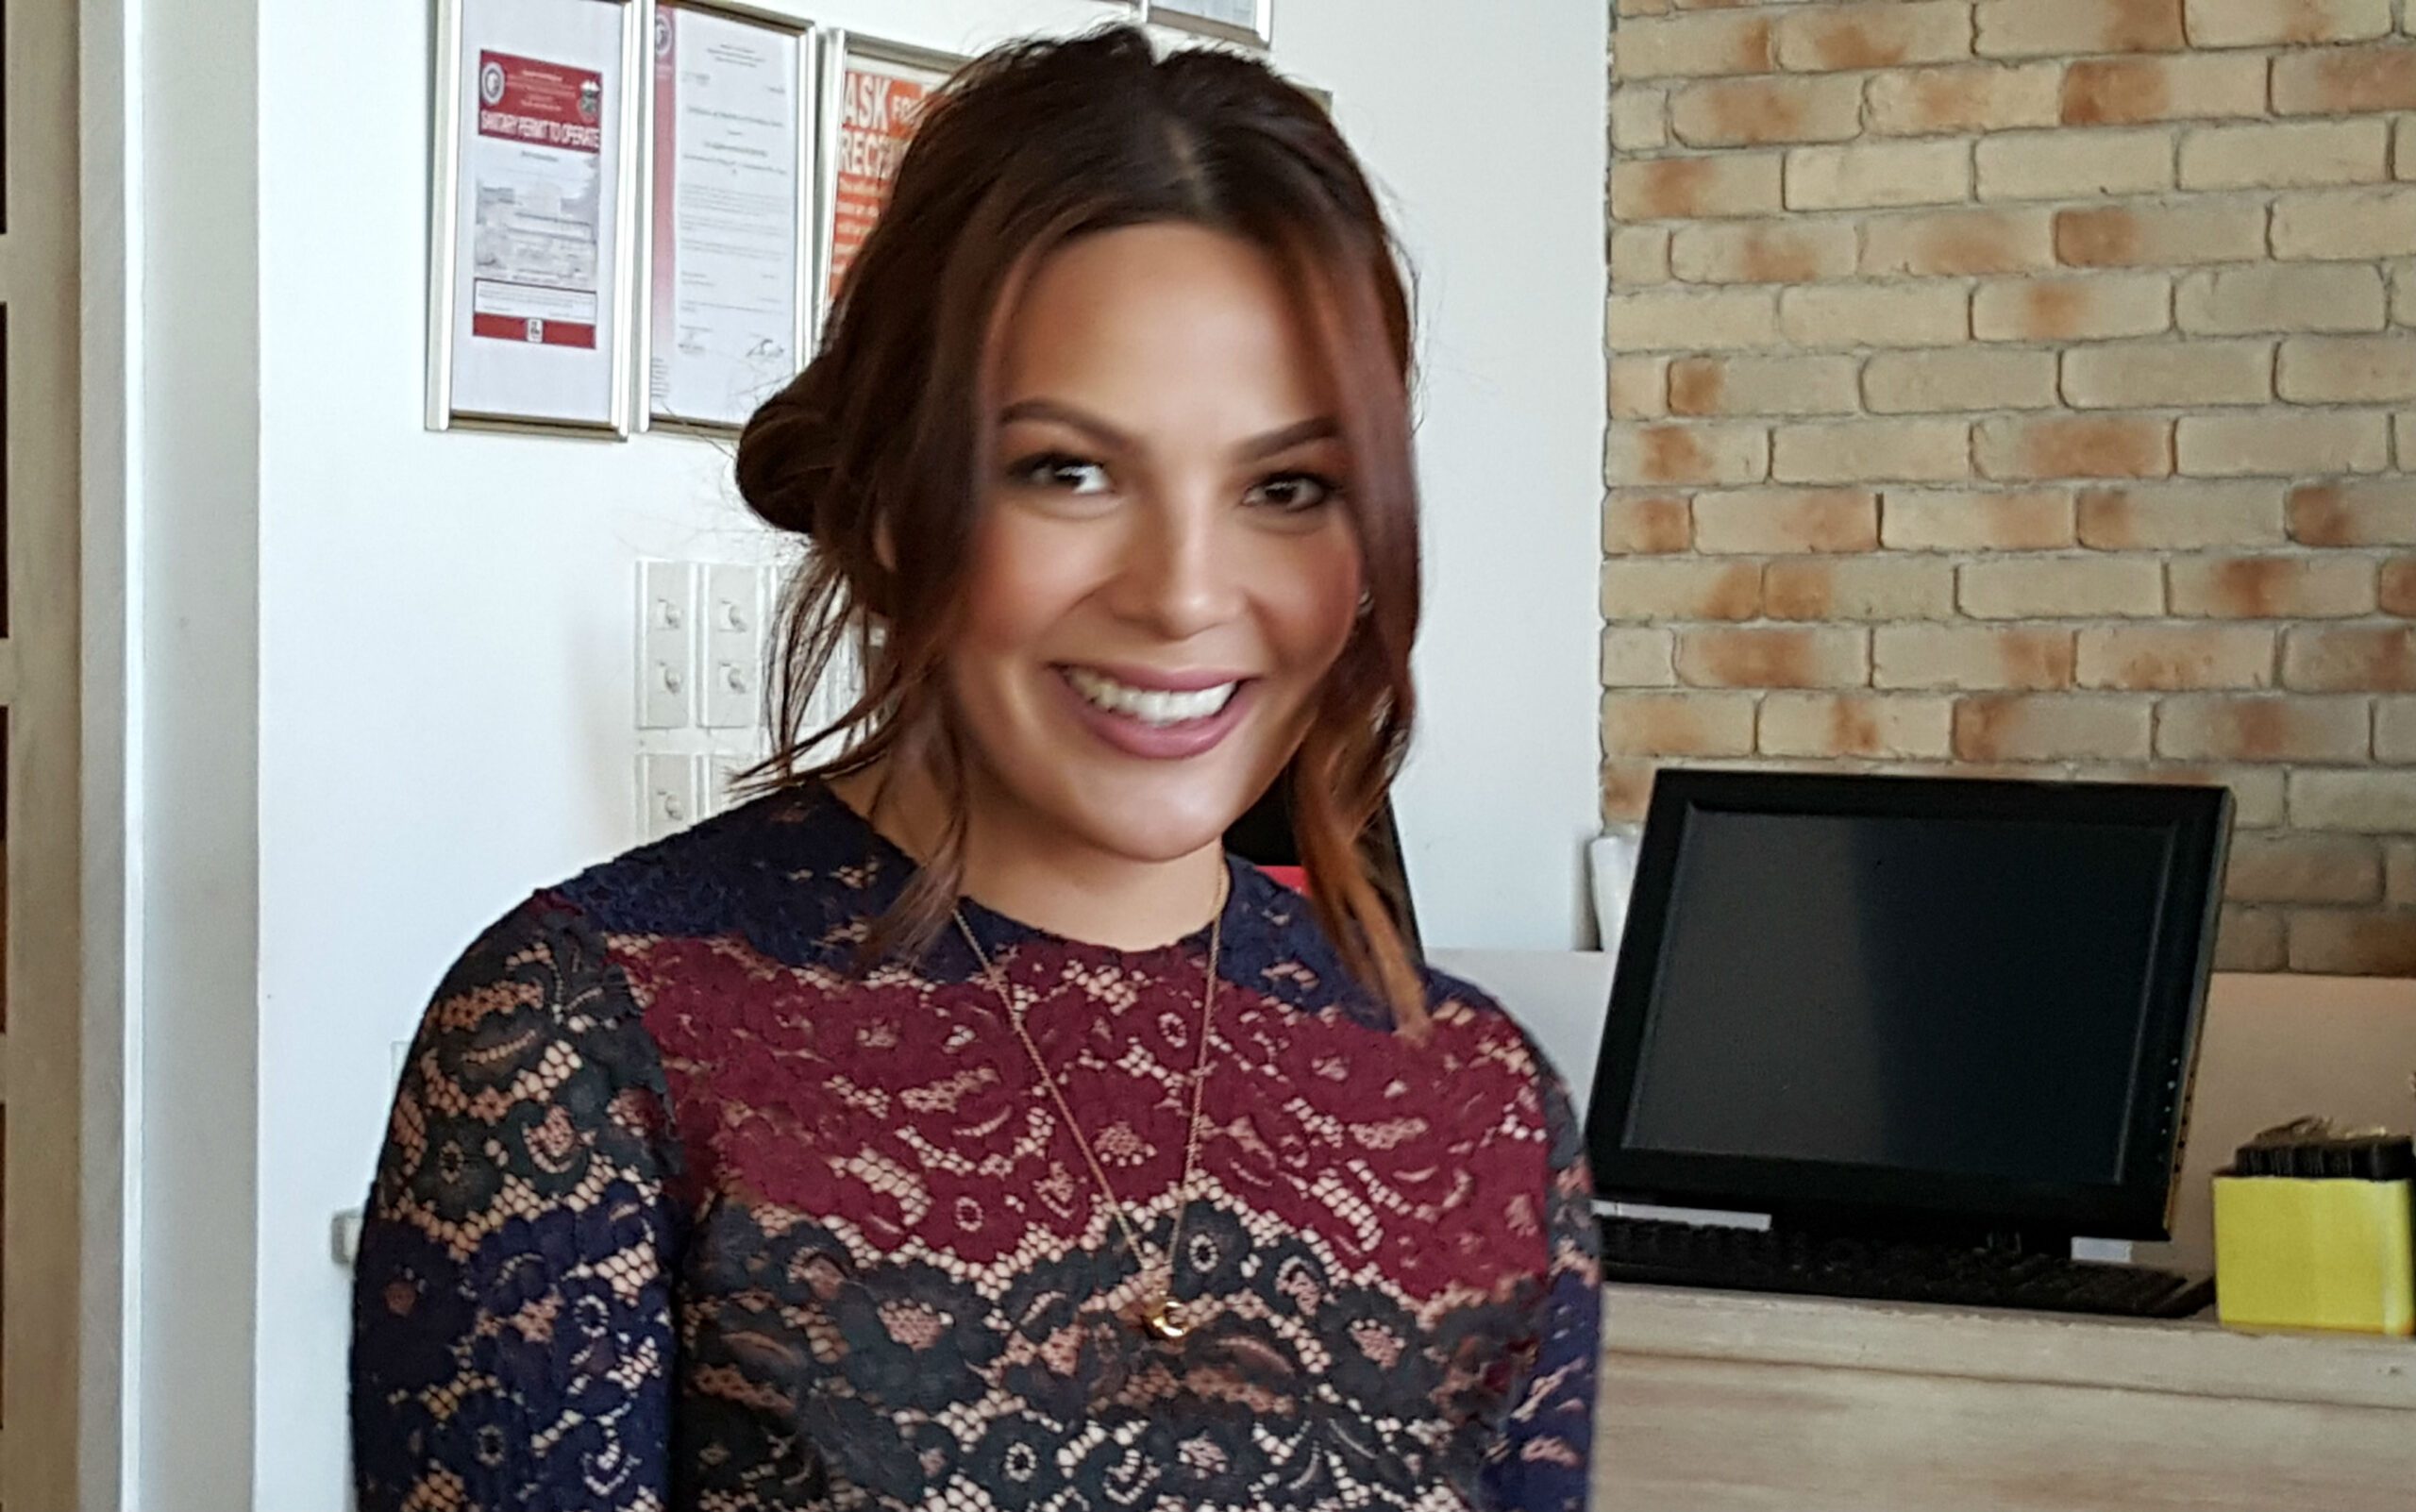 KC Concepcion on working again with Piolo Pascual: ‘We both have to be 100% ready’